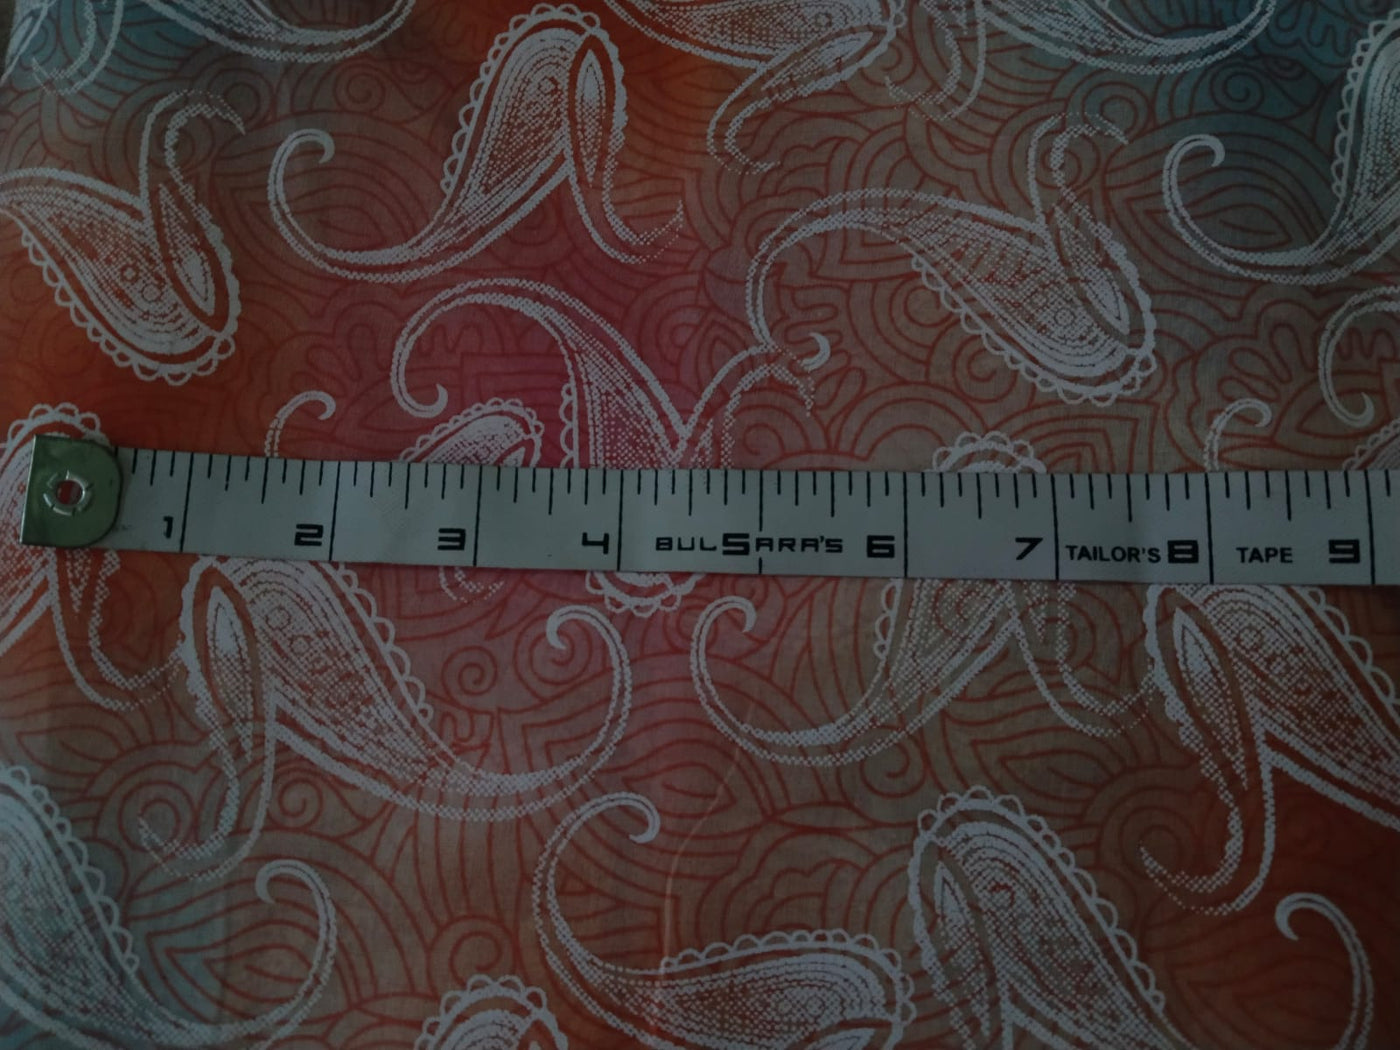 Cotton organdy printed 44 inches available in 2 designs [shaded paisleys pinks orange blue pink floral]